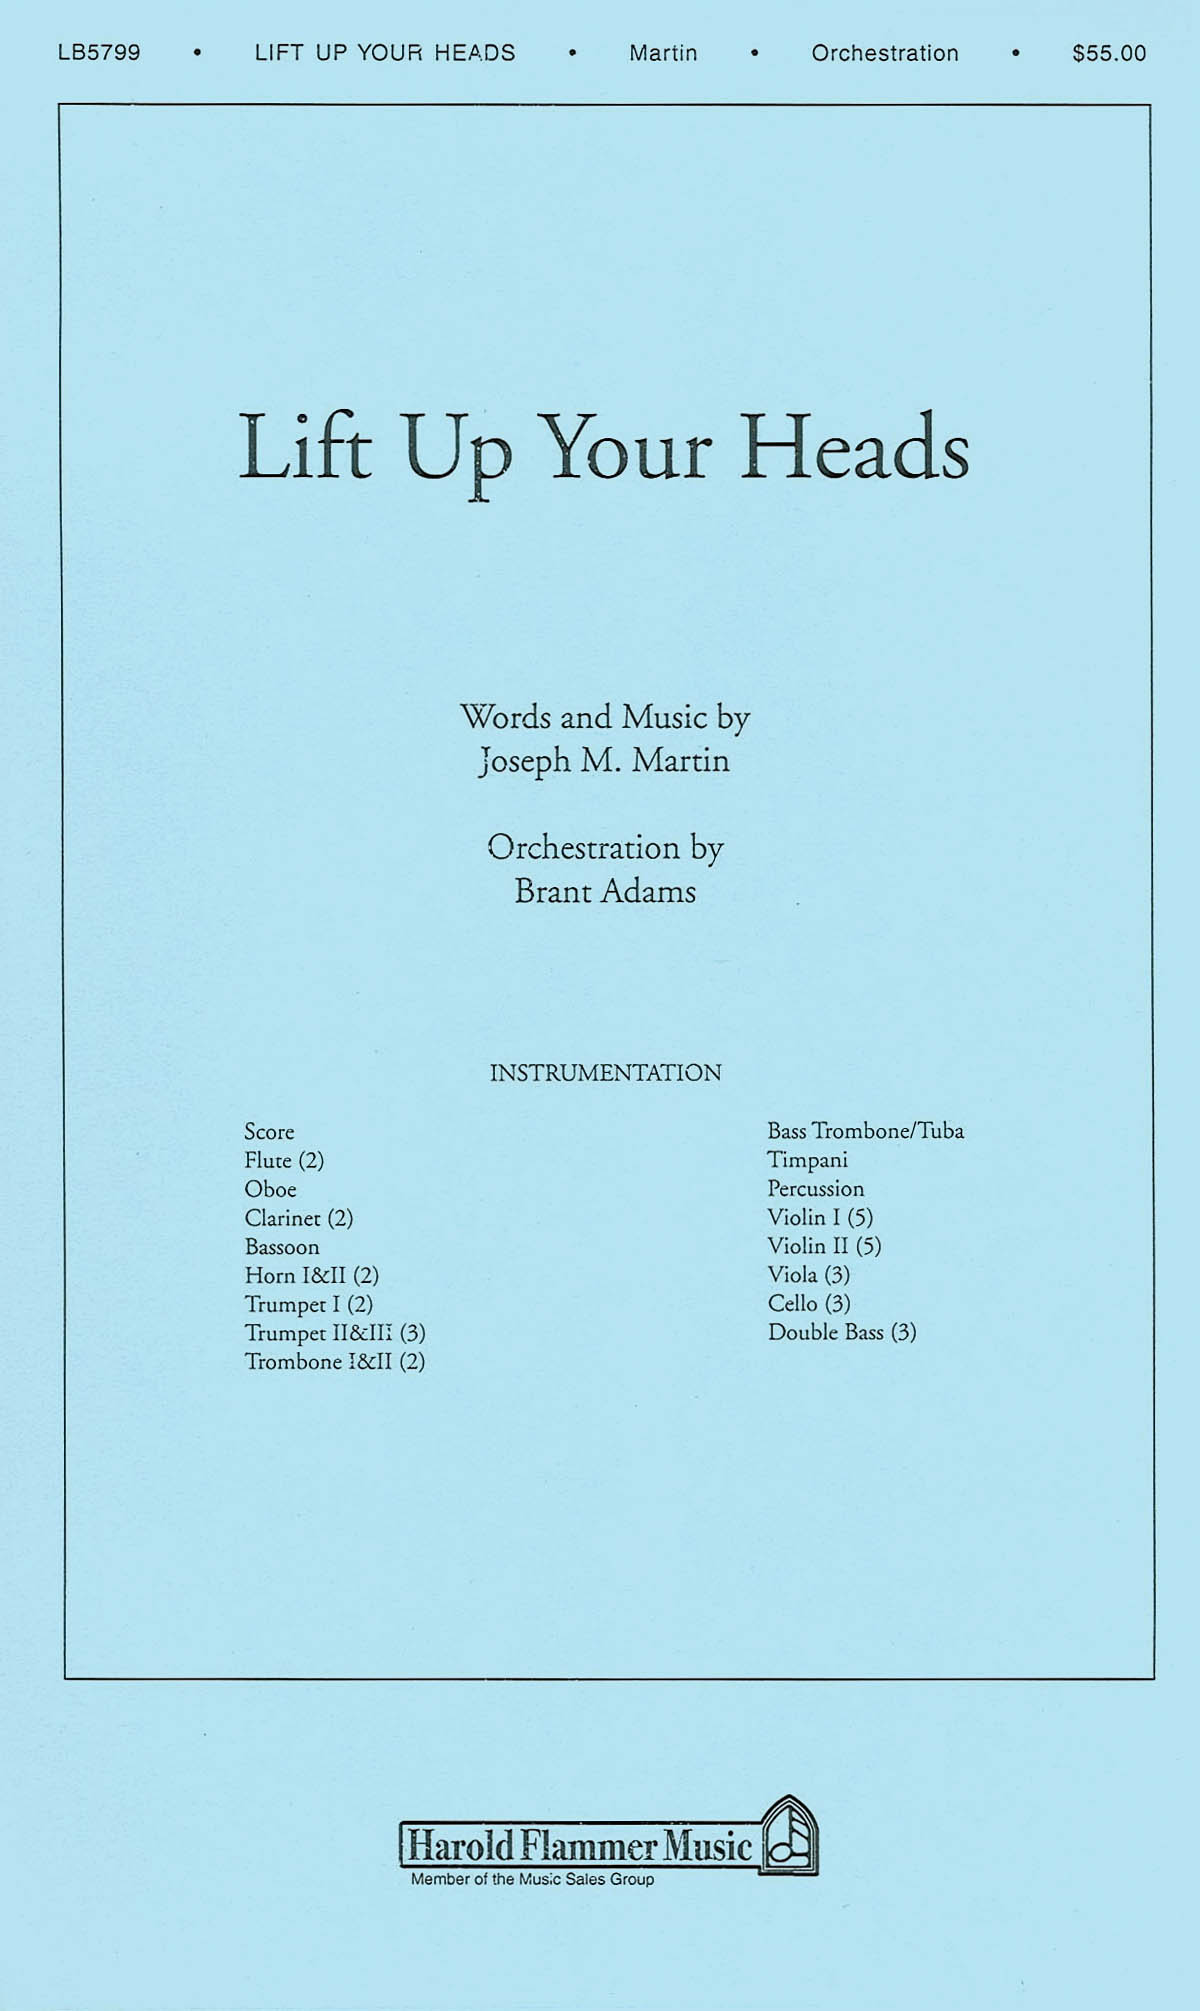 Jon Paige Joseph M. Martin: Lift Up Your Heads (from Journey of Promises):